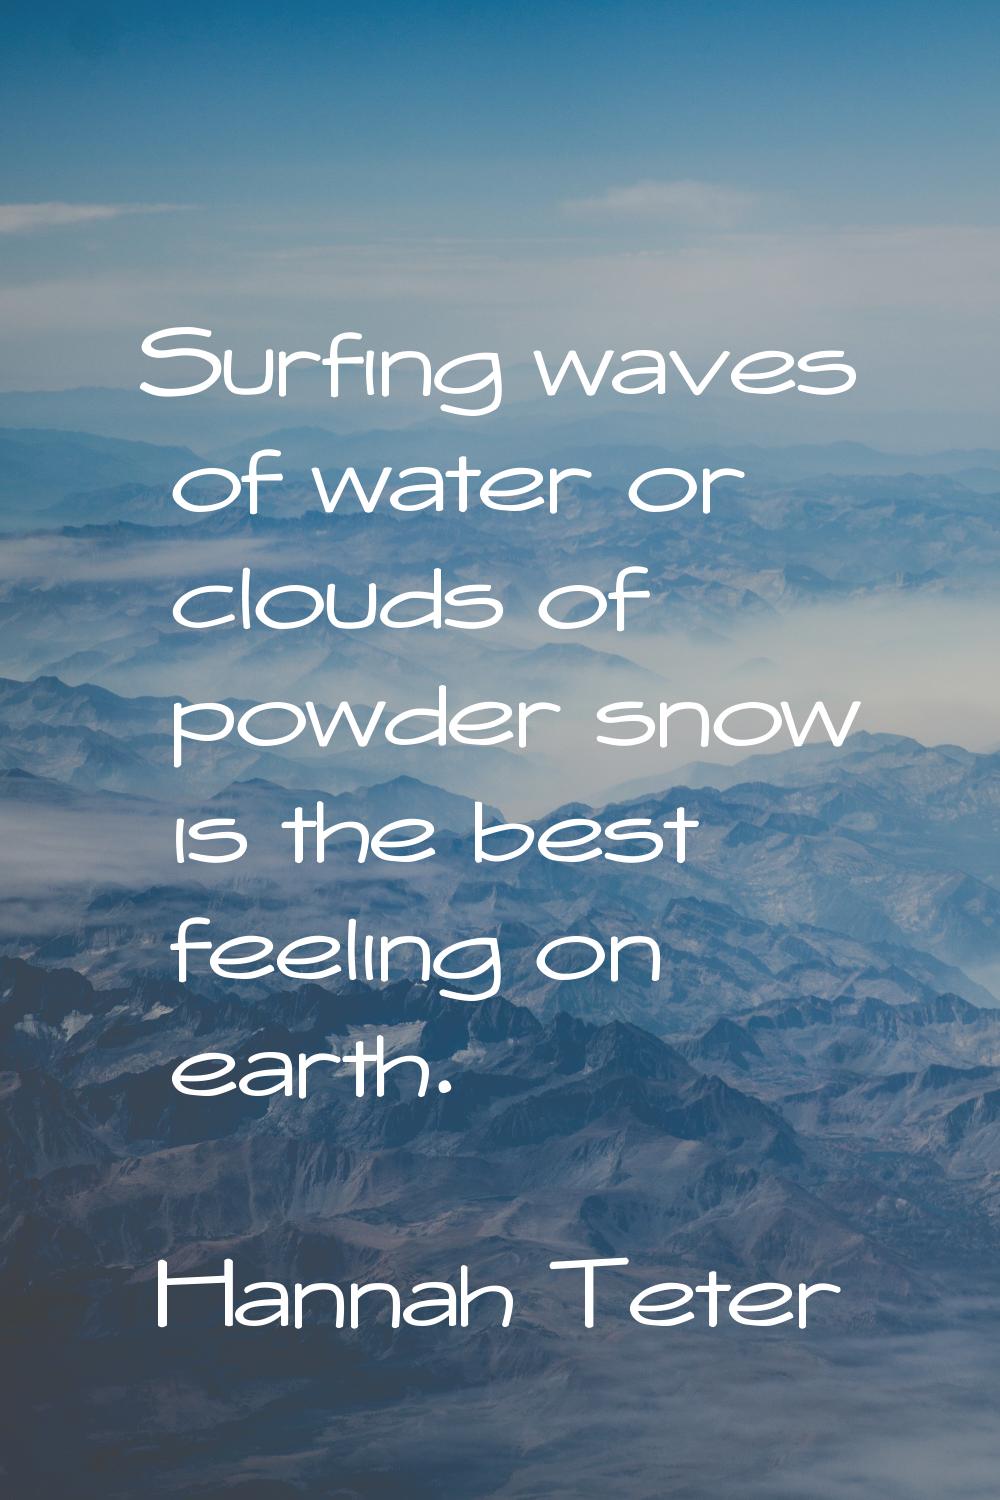 Surfing waves of water or clouds of powder snow is the best feeling on earth.